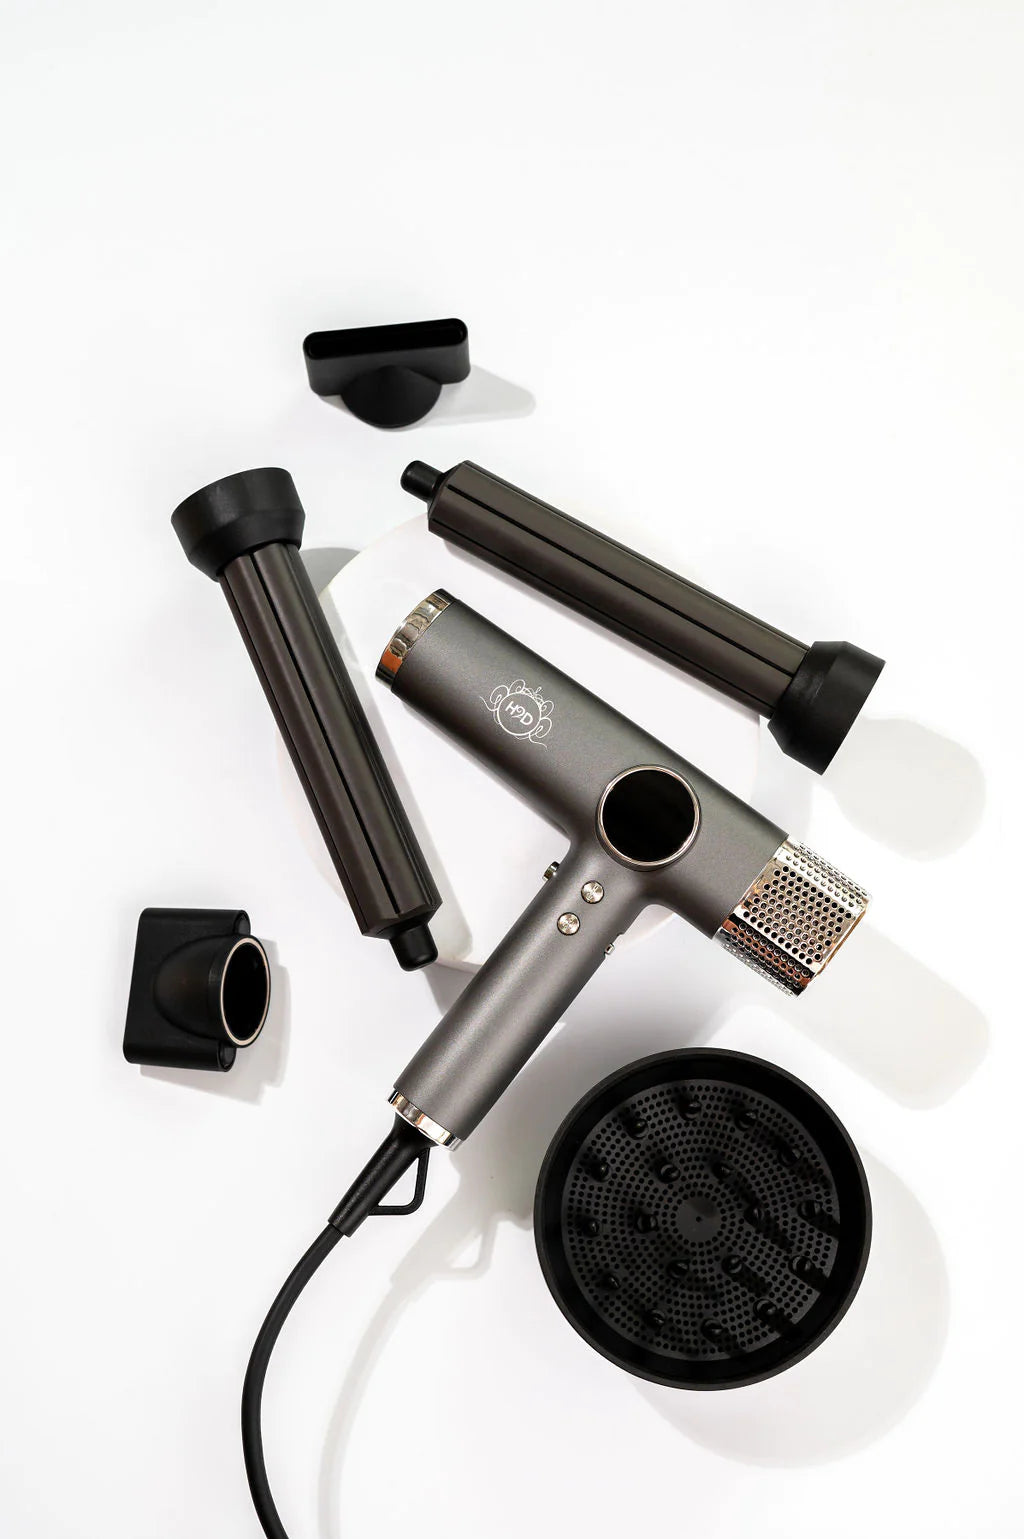 H2D Xtreme Four in One Hair Dryer + Styler space gray